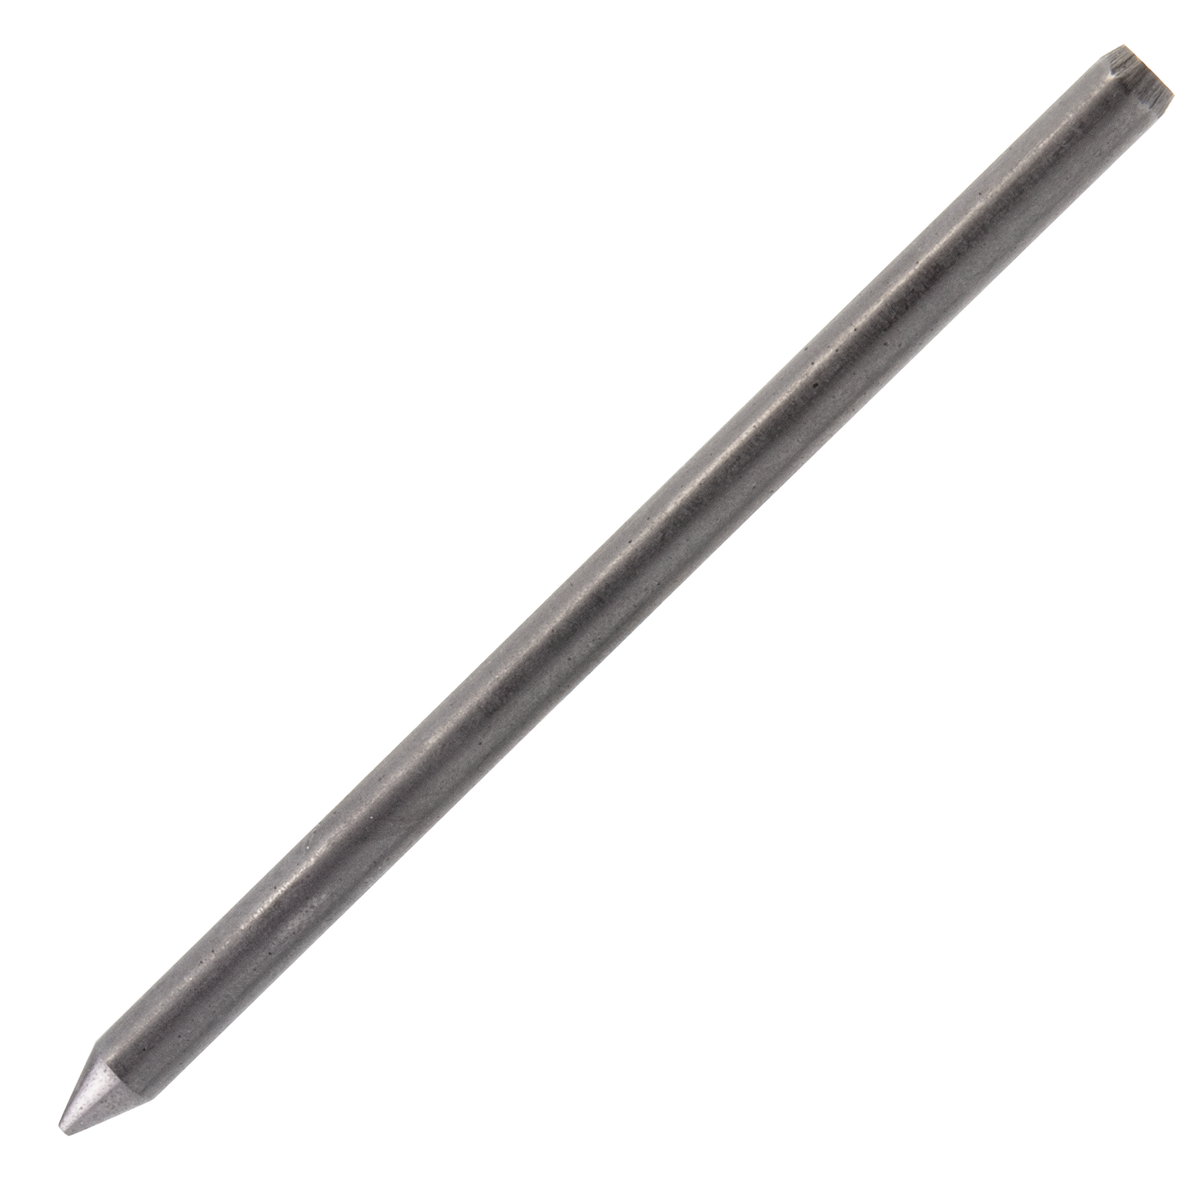 Montblanc Pencil Leads for Sketch Pencil 2 per pack HB